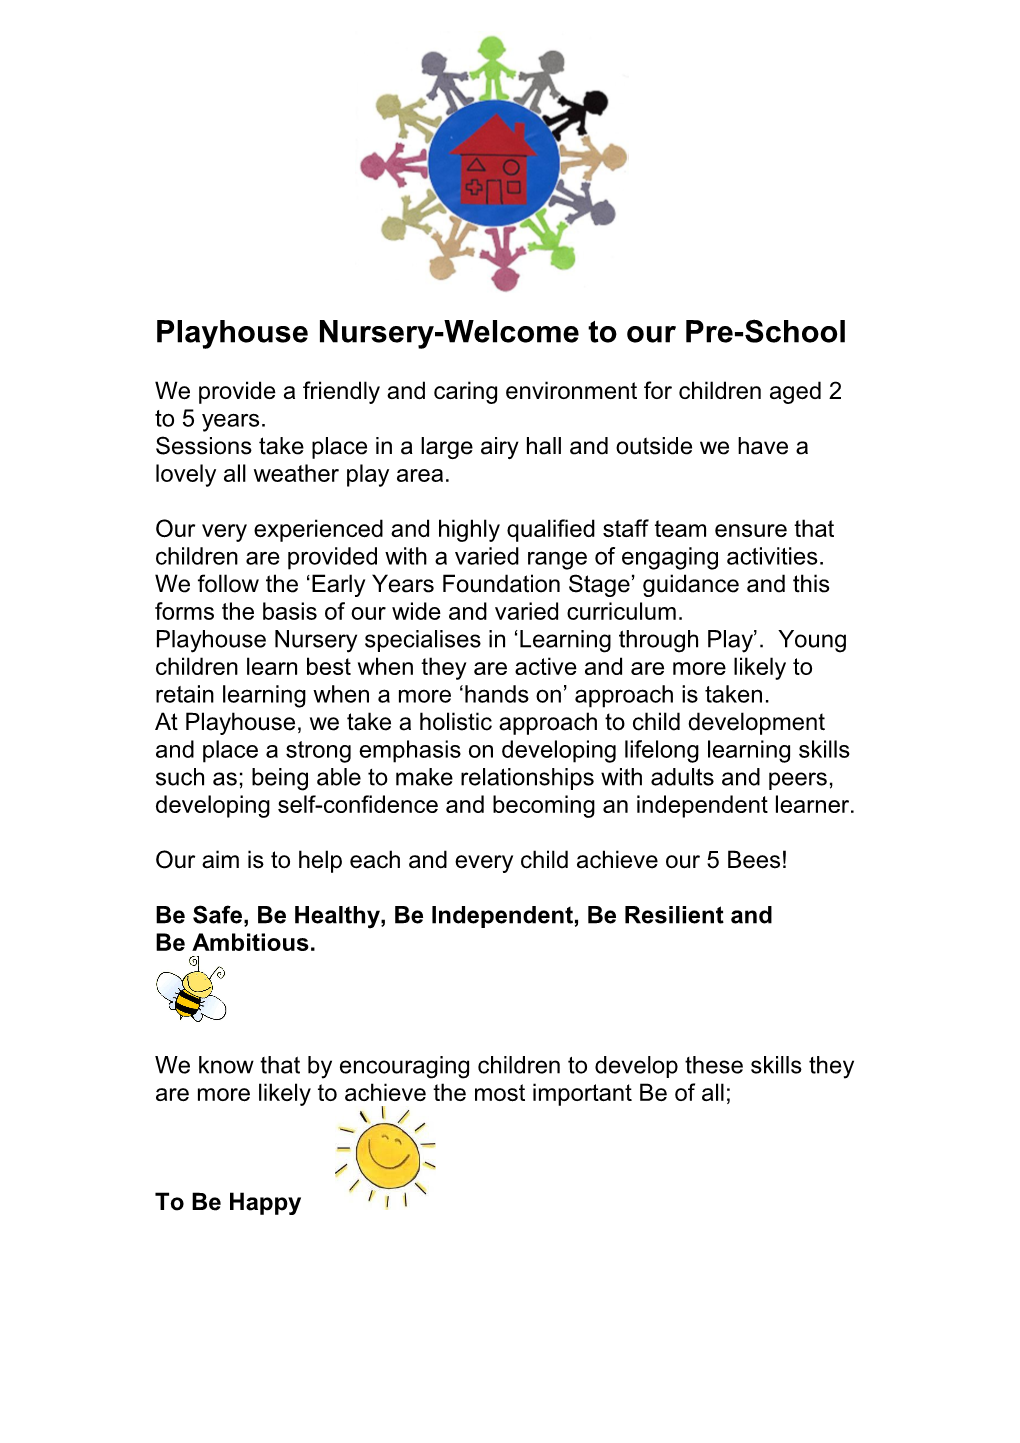 Playhouse Nursery-Welcome to Our Pre-School